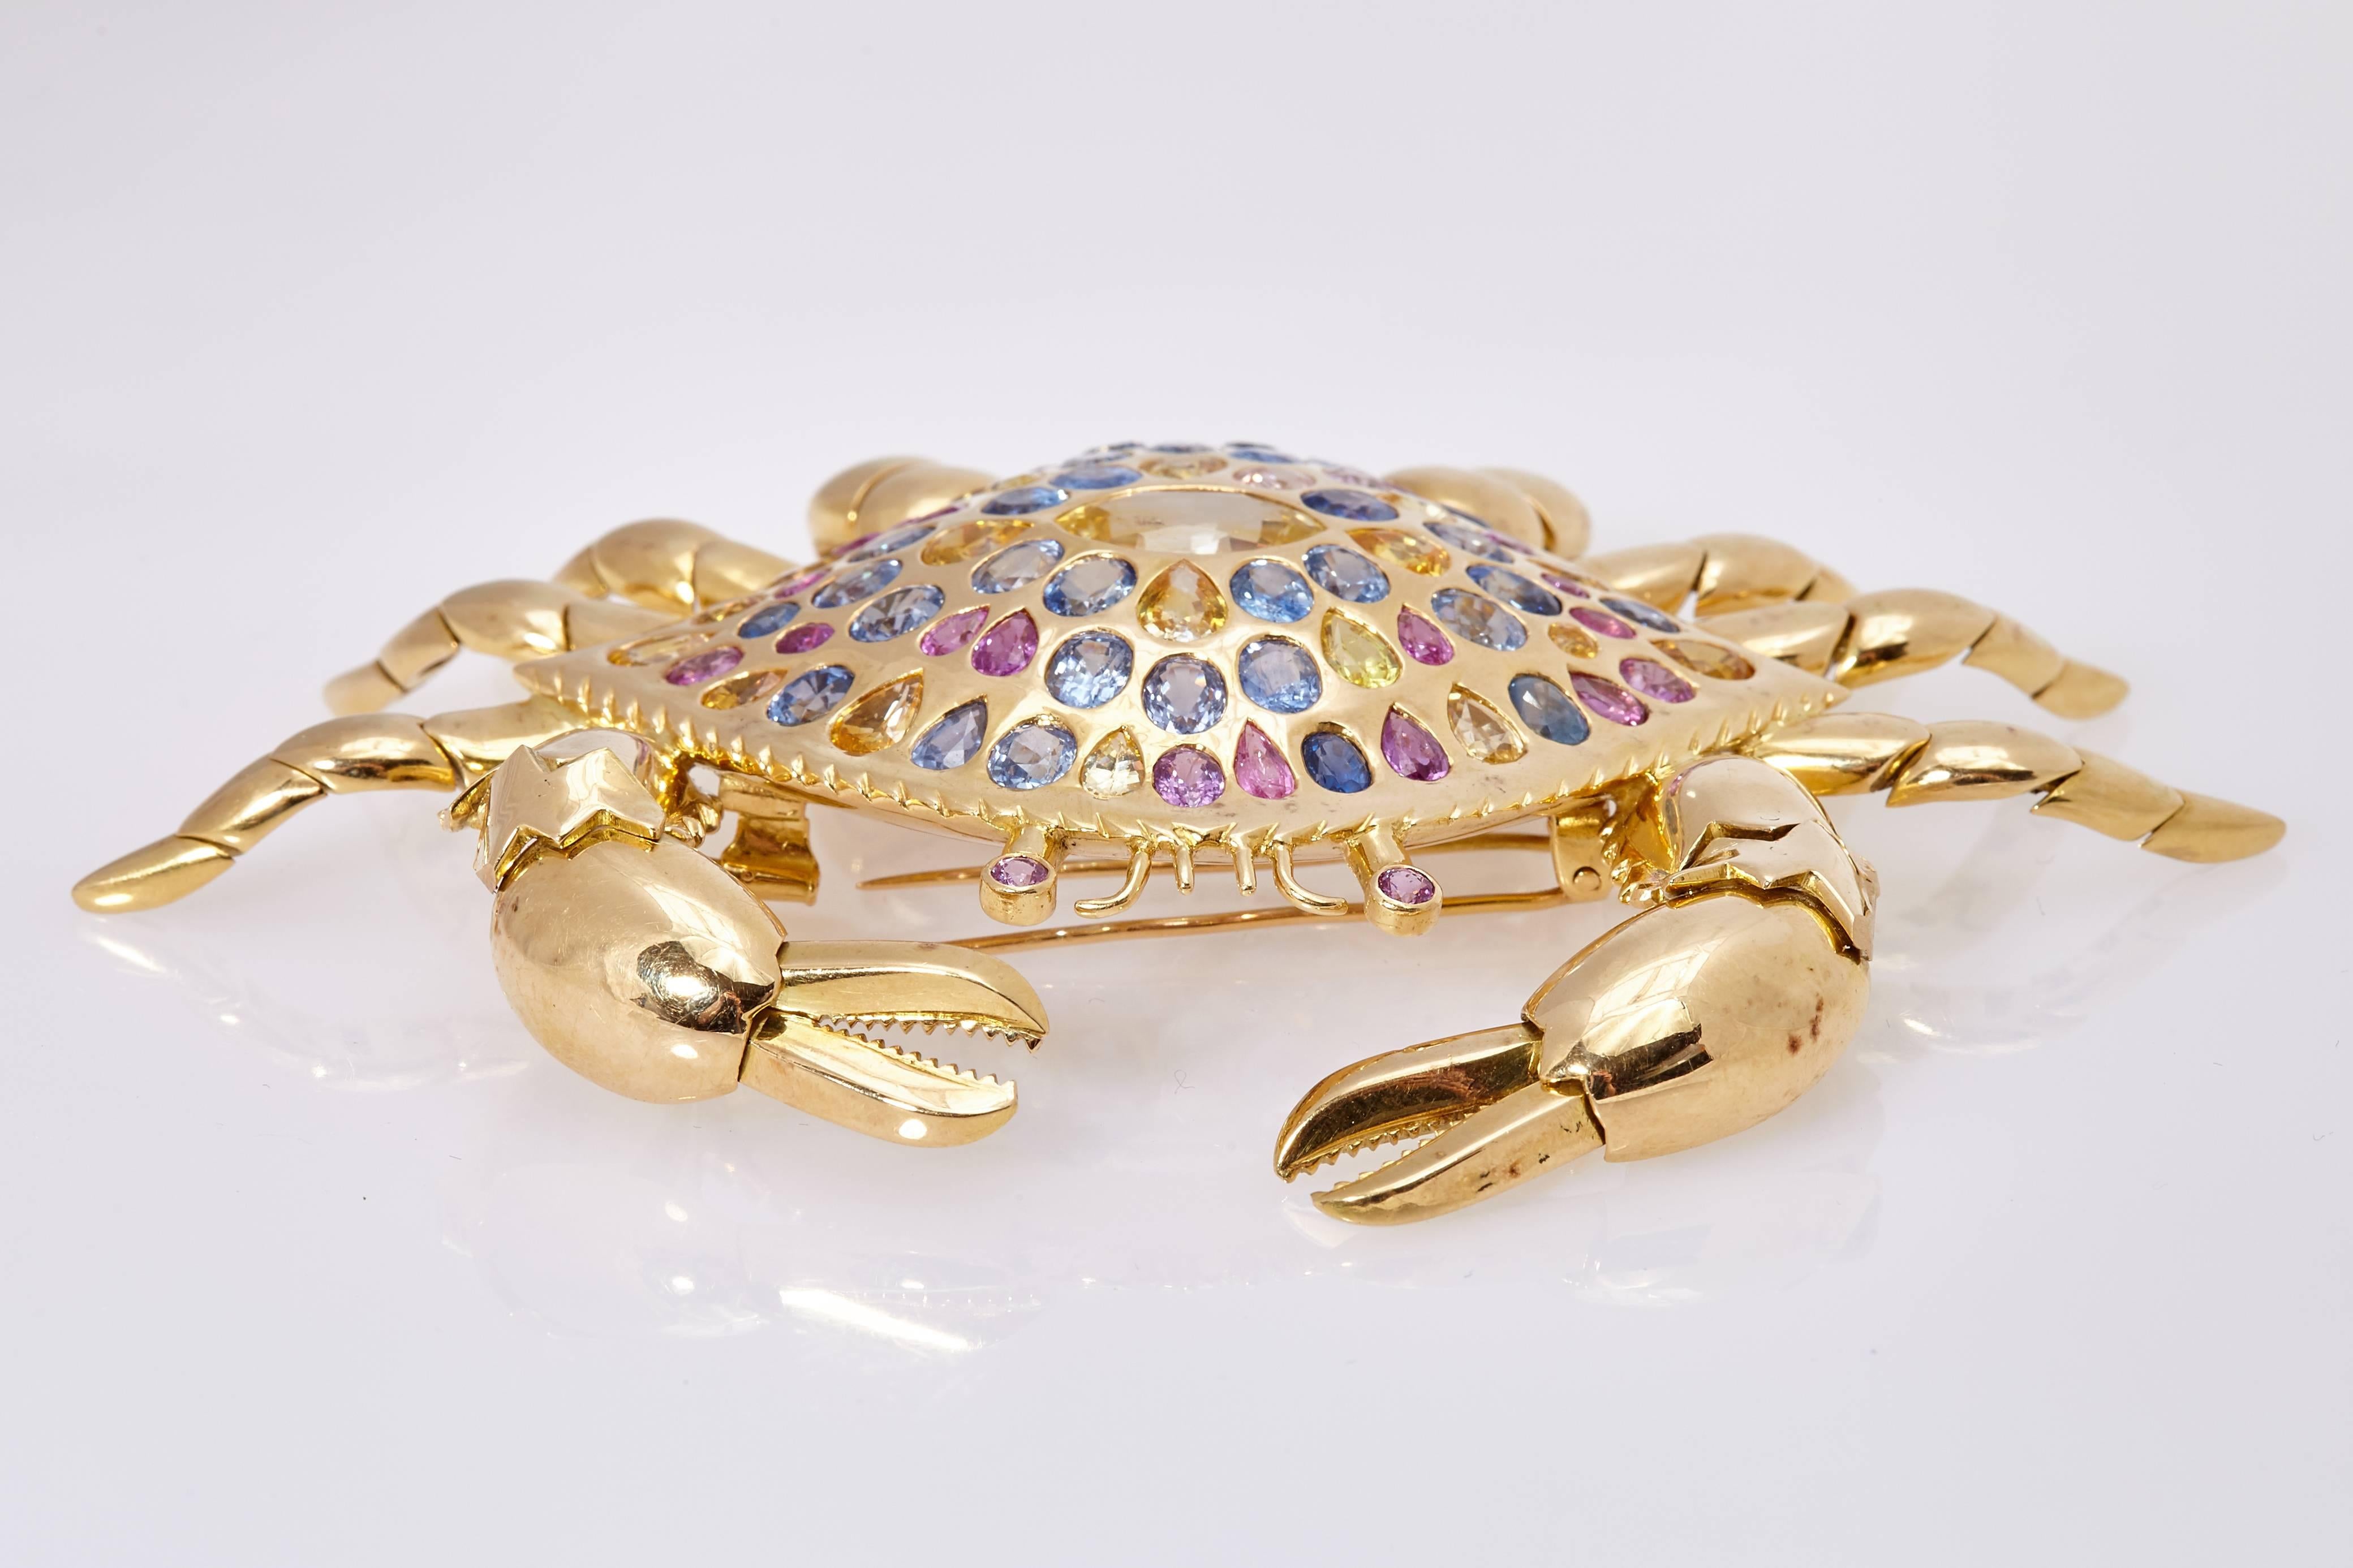 An impressive, large and articulated crab brooch. Made in 18kt yellow gold, enriched with 21 carats of multicolor sapphires. Circa 1980s 